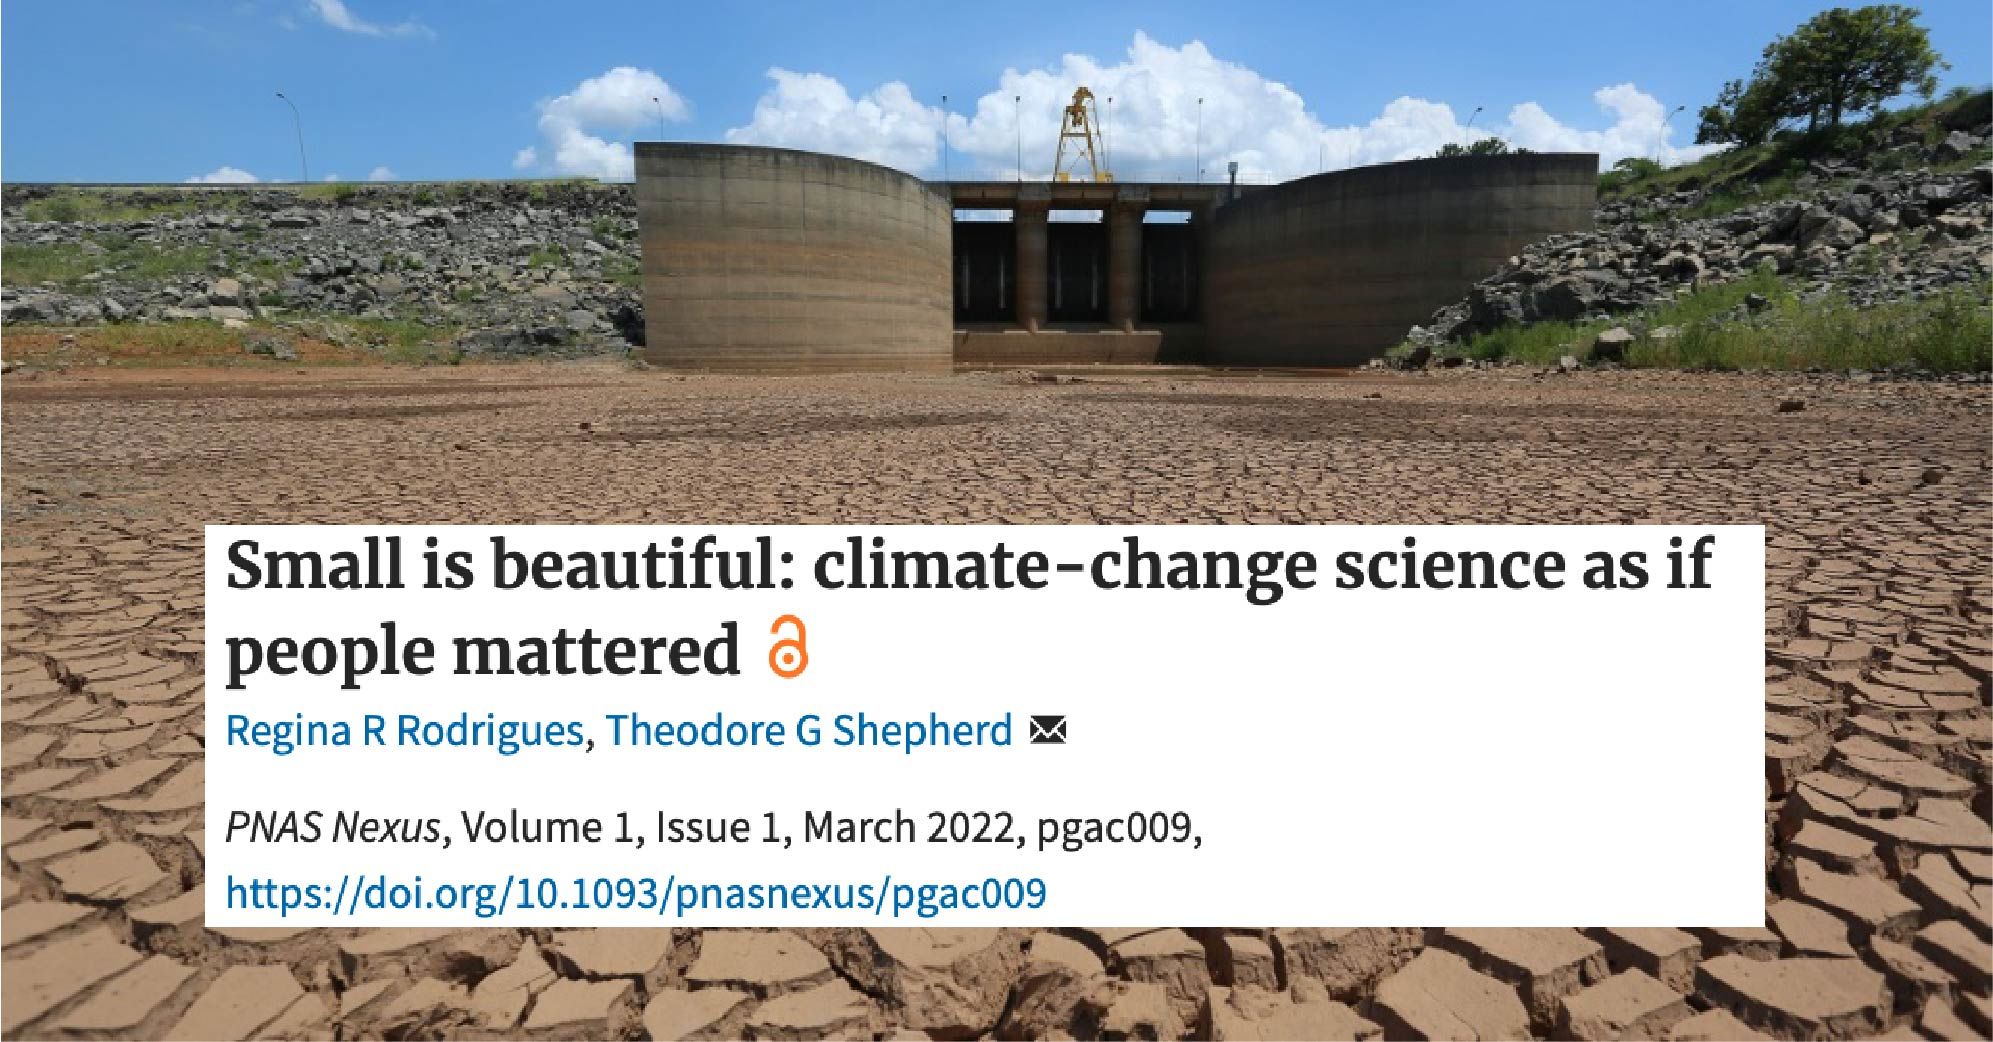 Small is beautiful: climate-change science as if people mattered